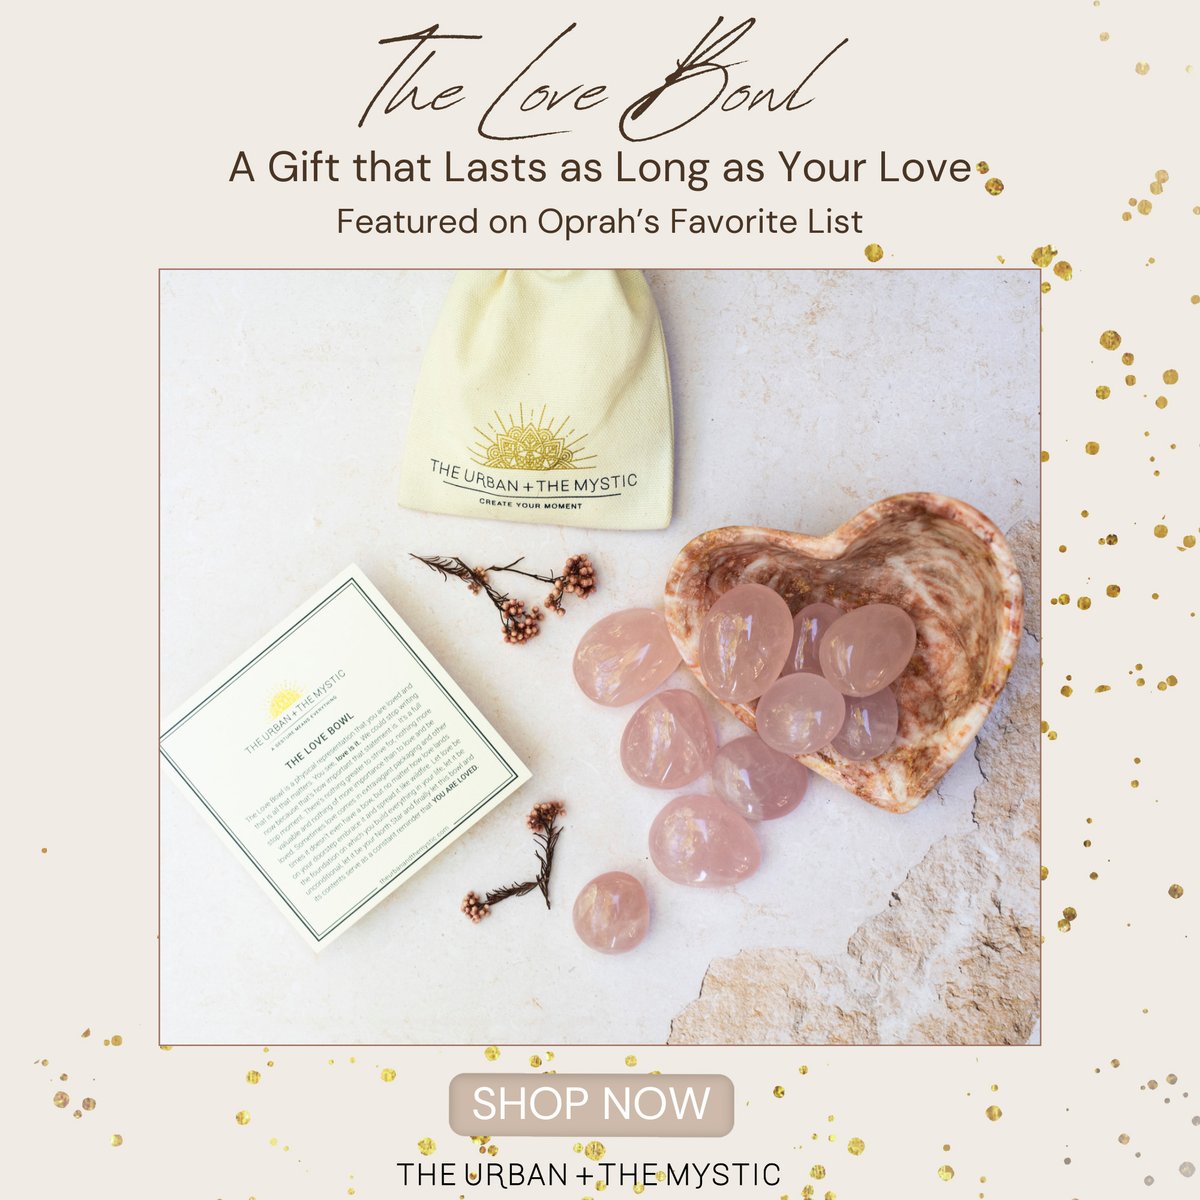 As seen on #OprahsFavoriteThings list, The Urban +The Mystic has a gift that lasts as long as your love! Shop Now at theurbanandthemystic.com #gifts #meditation #reiki #crystalreader #medium #theurban+themystic #courtneyabbiati @theurbanandthemystic